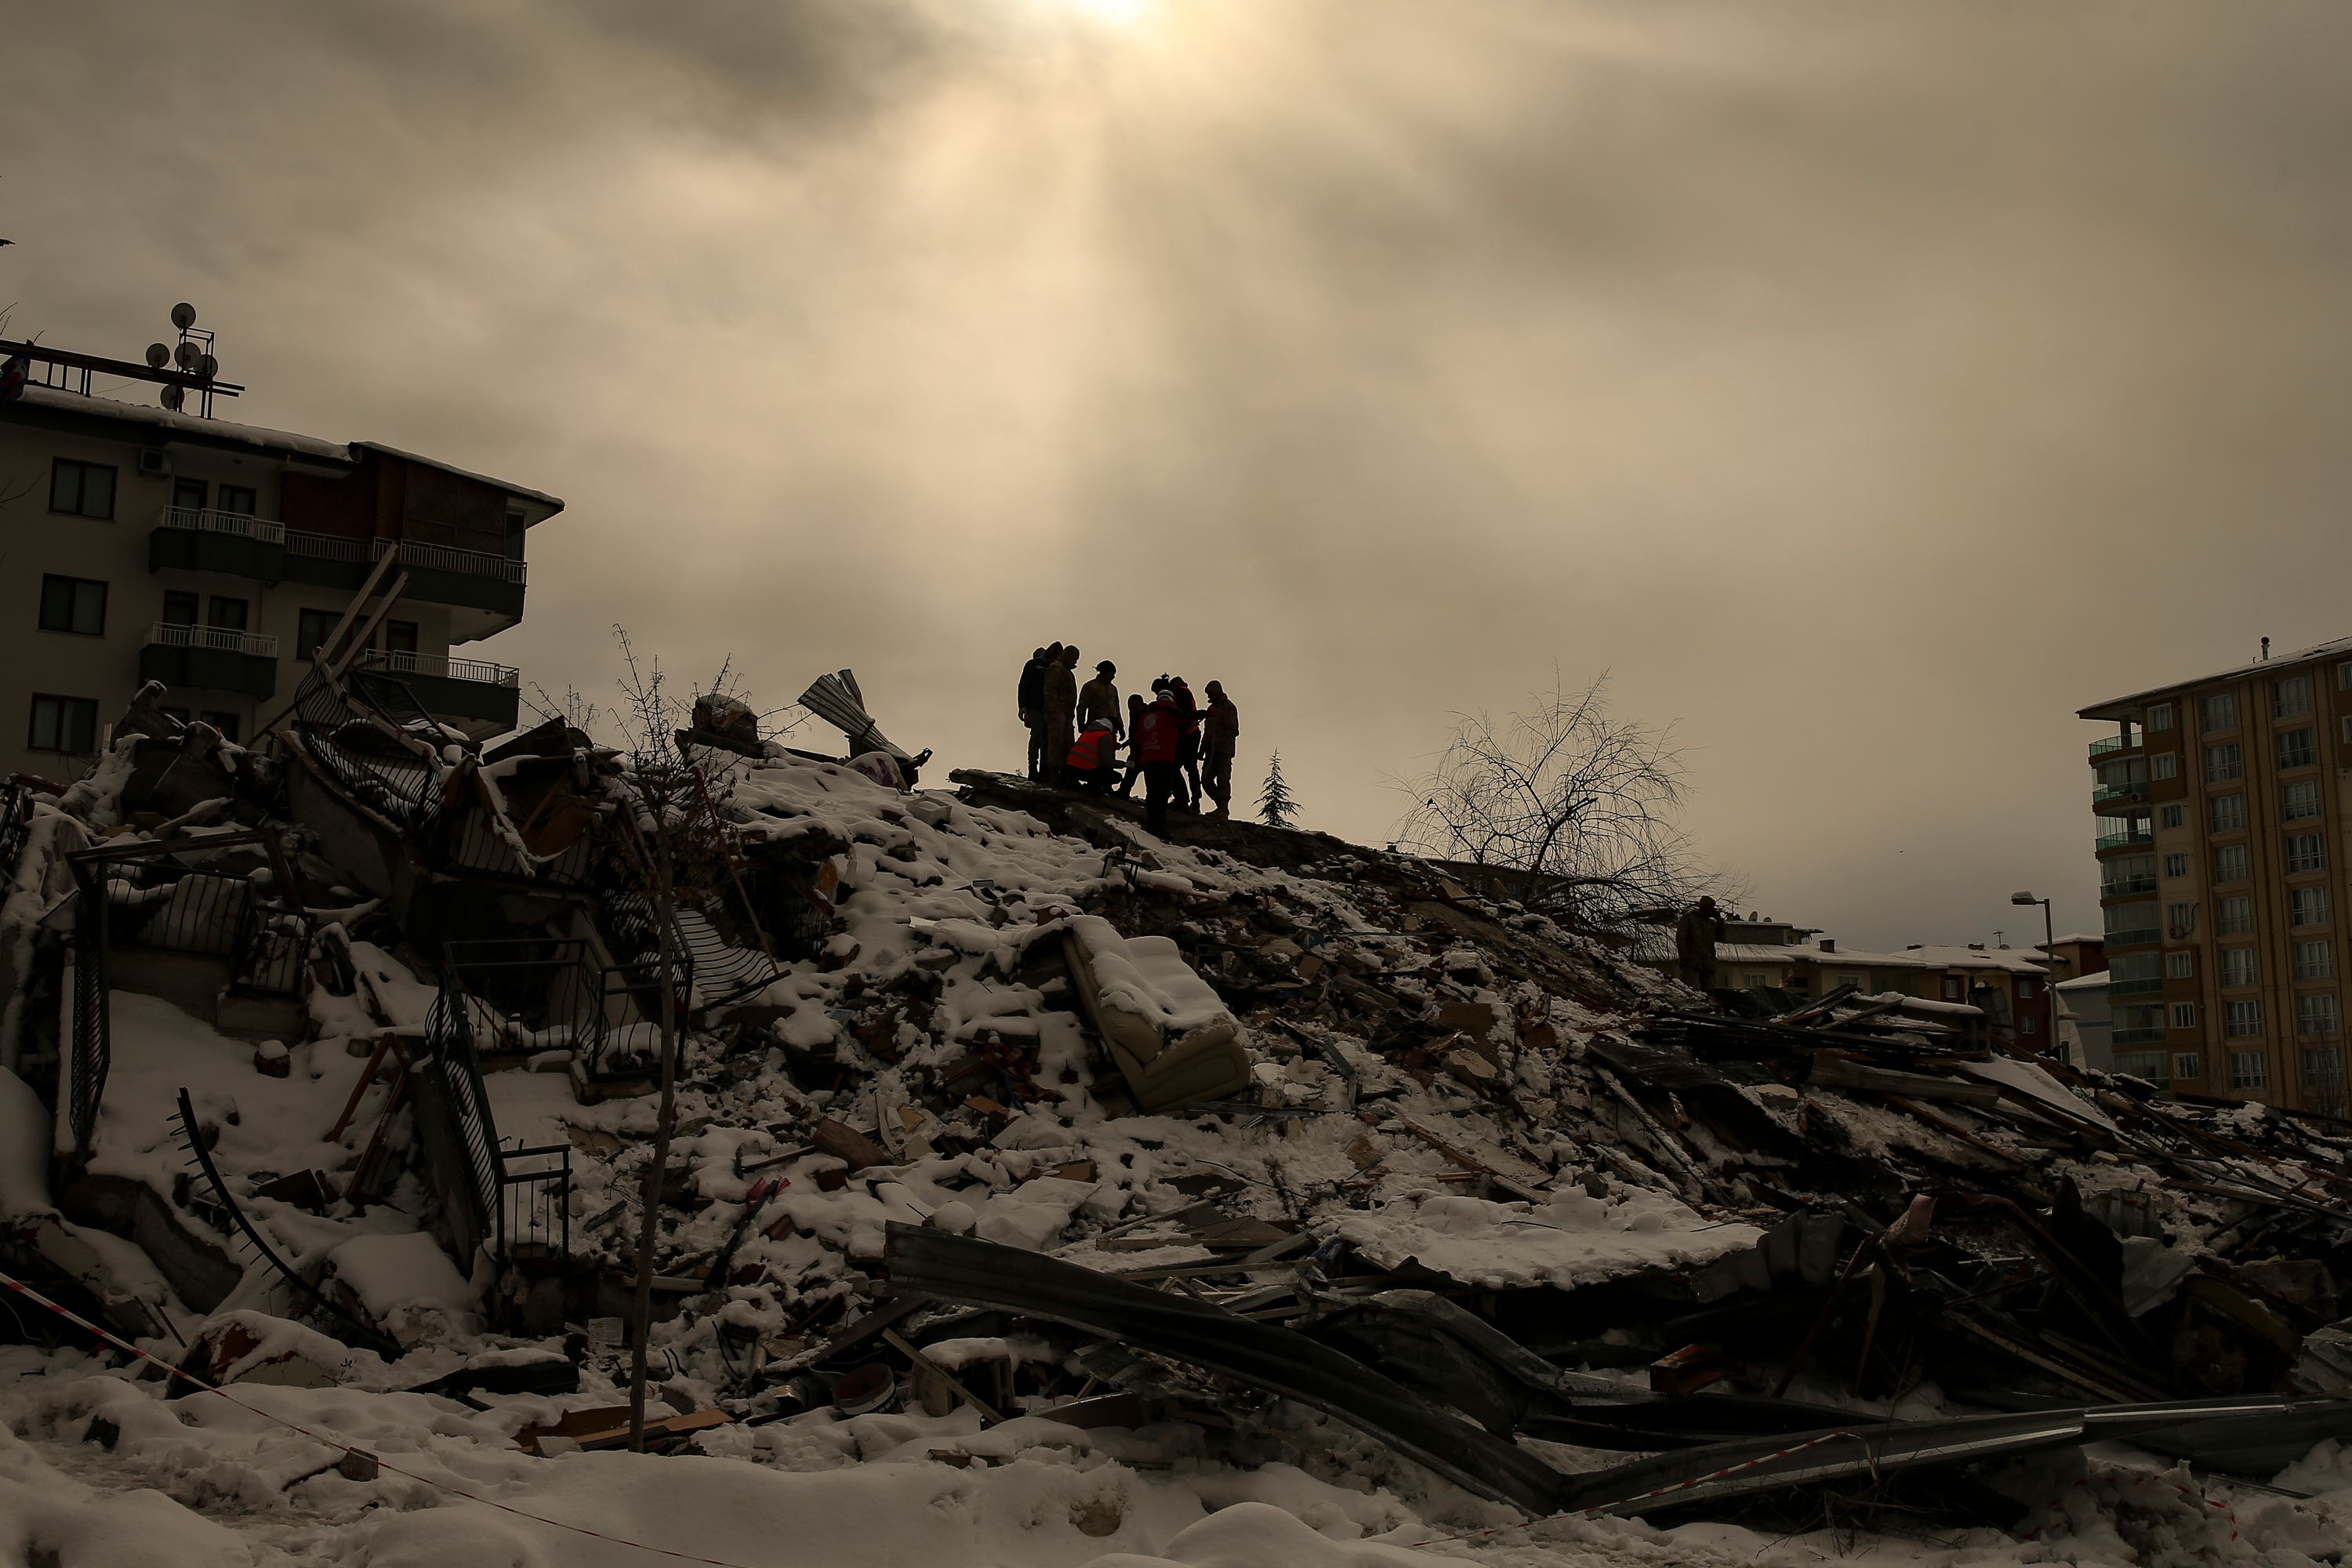 People try to reach people trapped under the debris of a collapsed building in Malatya, Turkey (Emrah Gurel/AP)